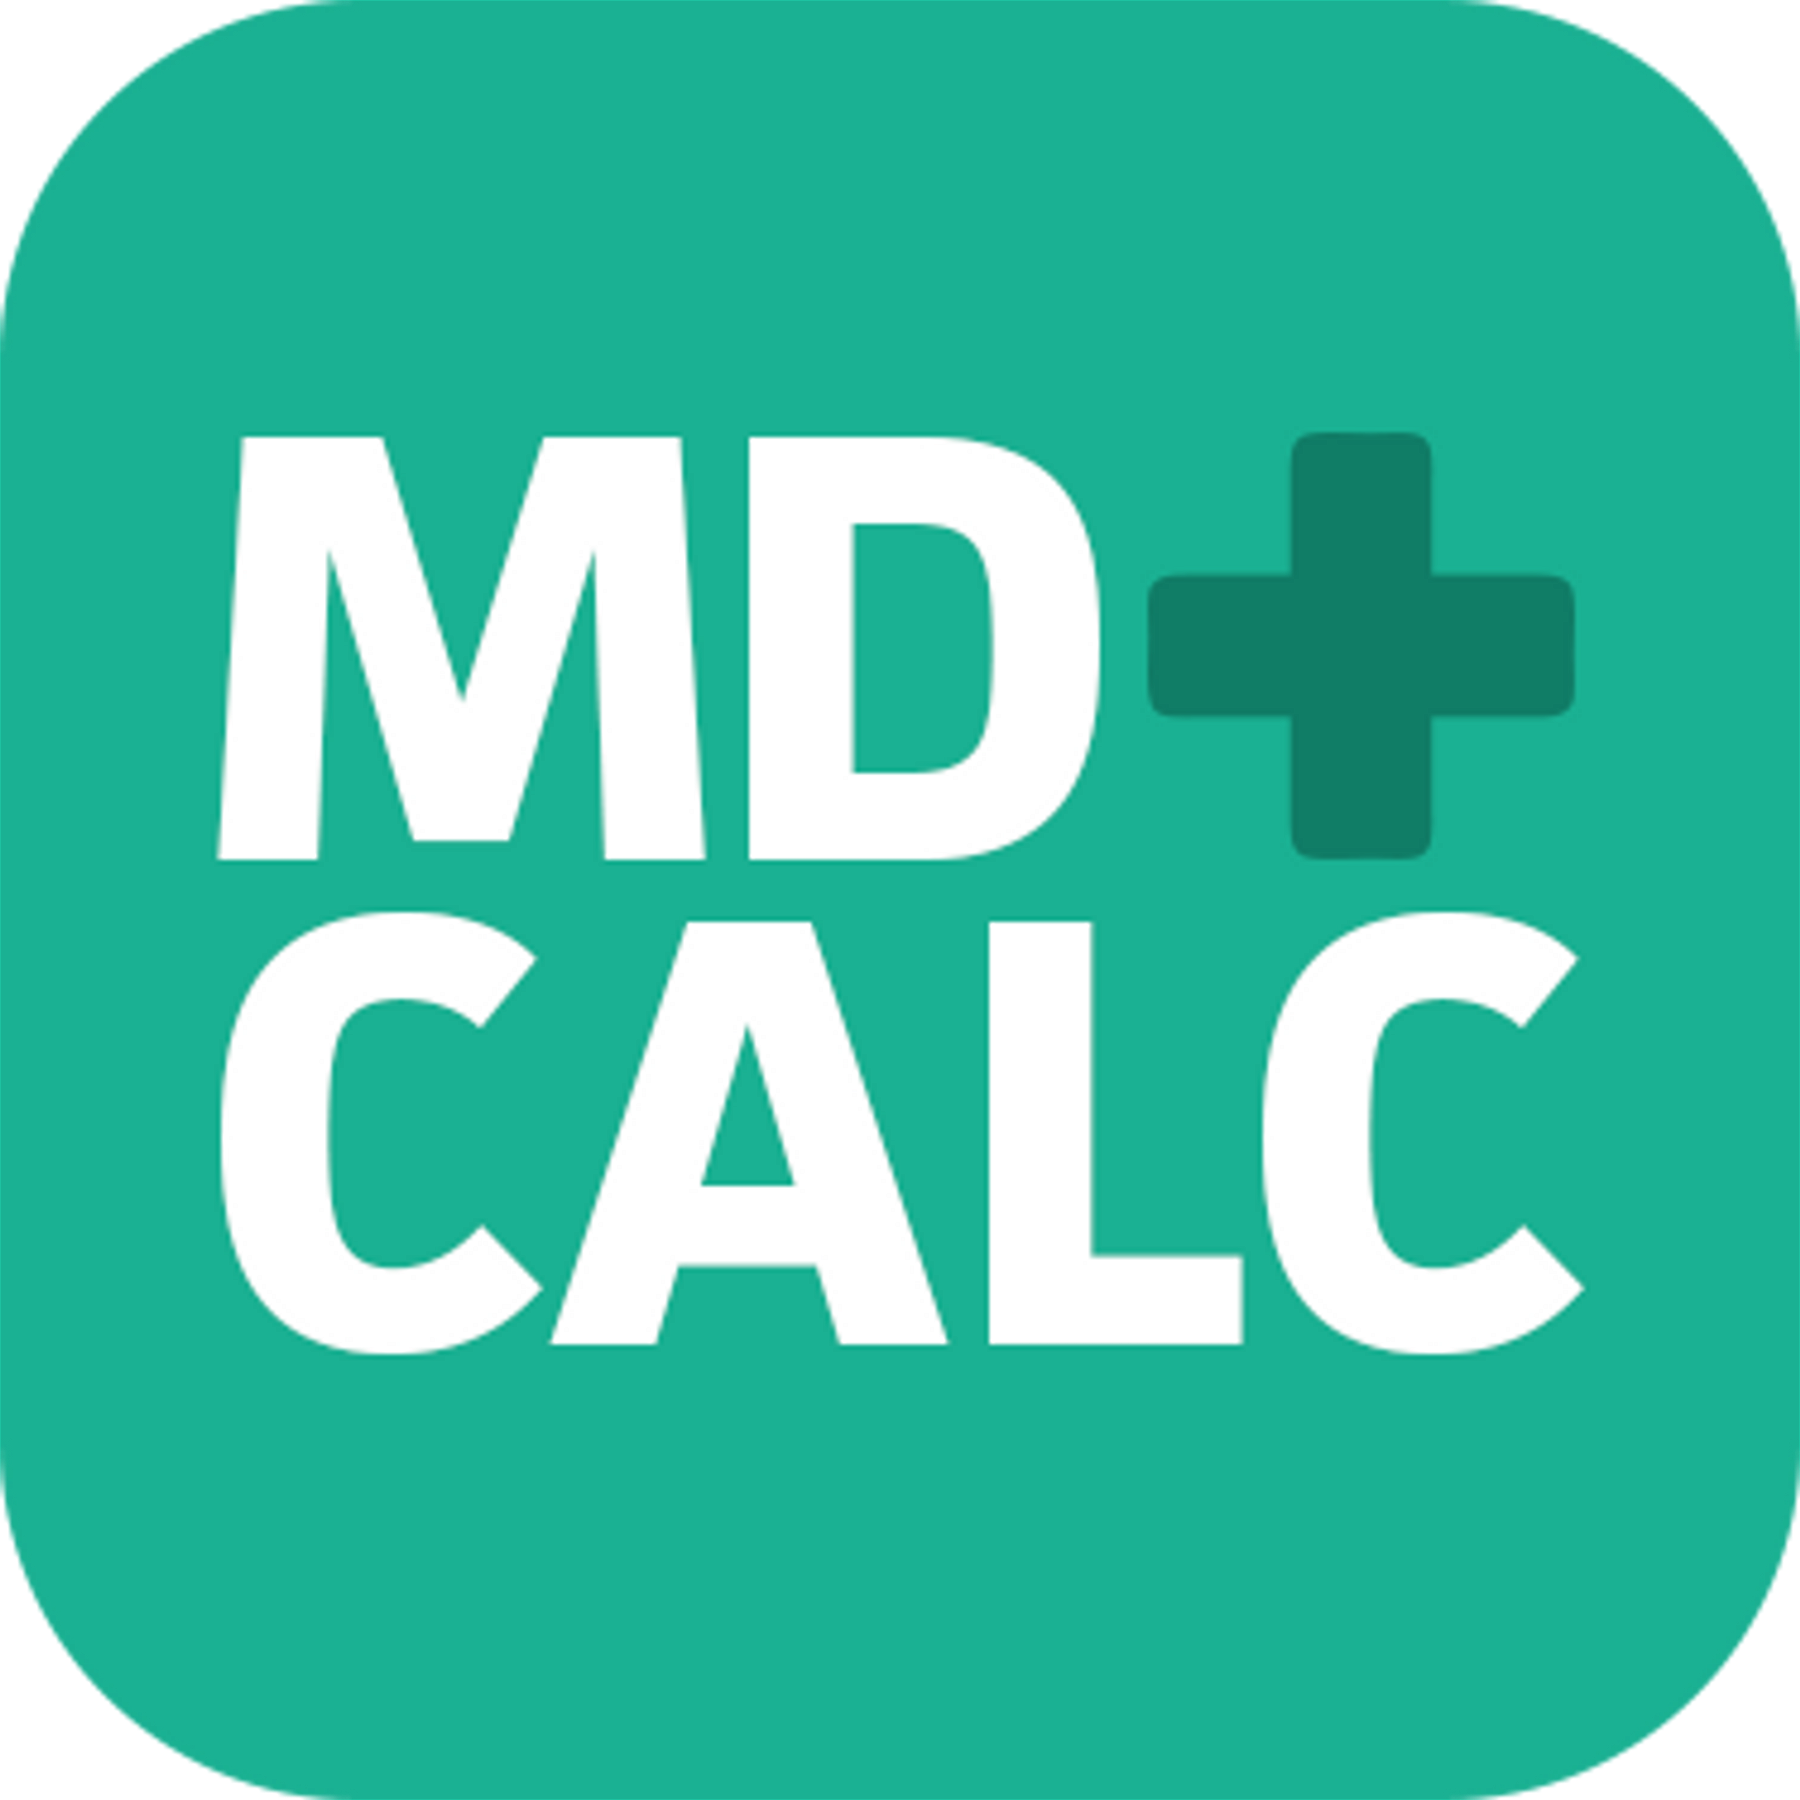 MDCalc - Medical calculators, equations, scores, and guidelines